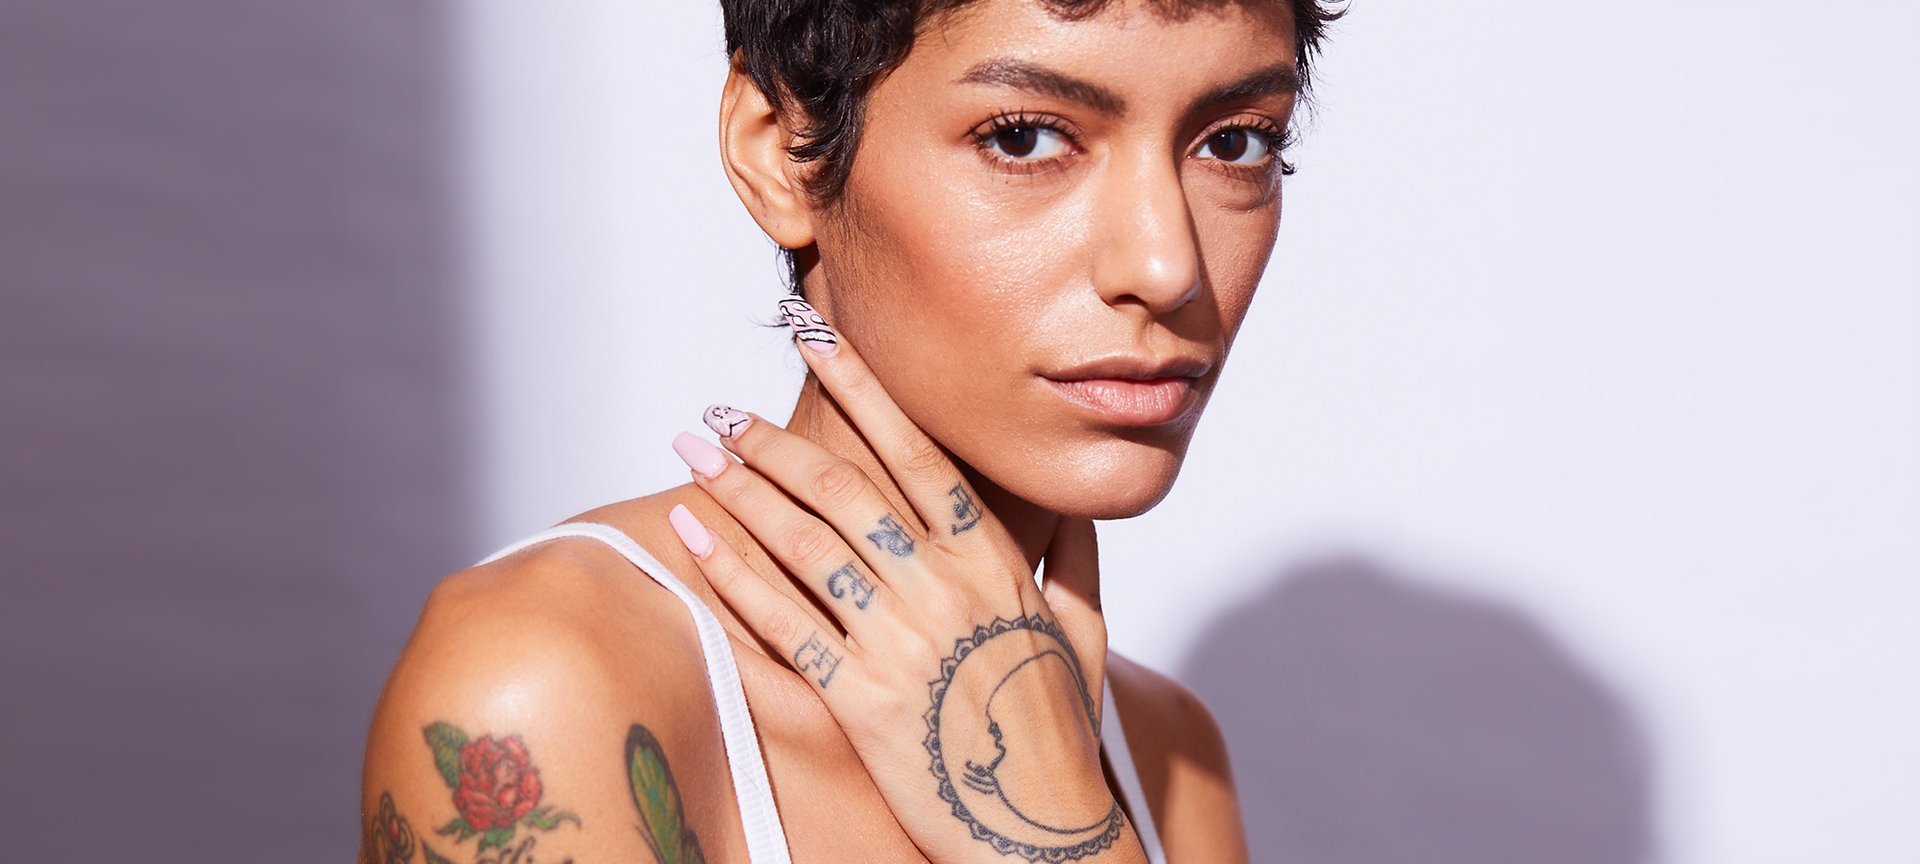 Makeup That Covers Up Tattoos - 7 Product Recommendations From Tattoo  Experts